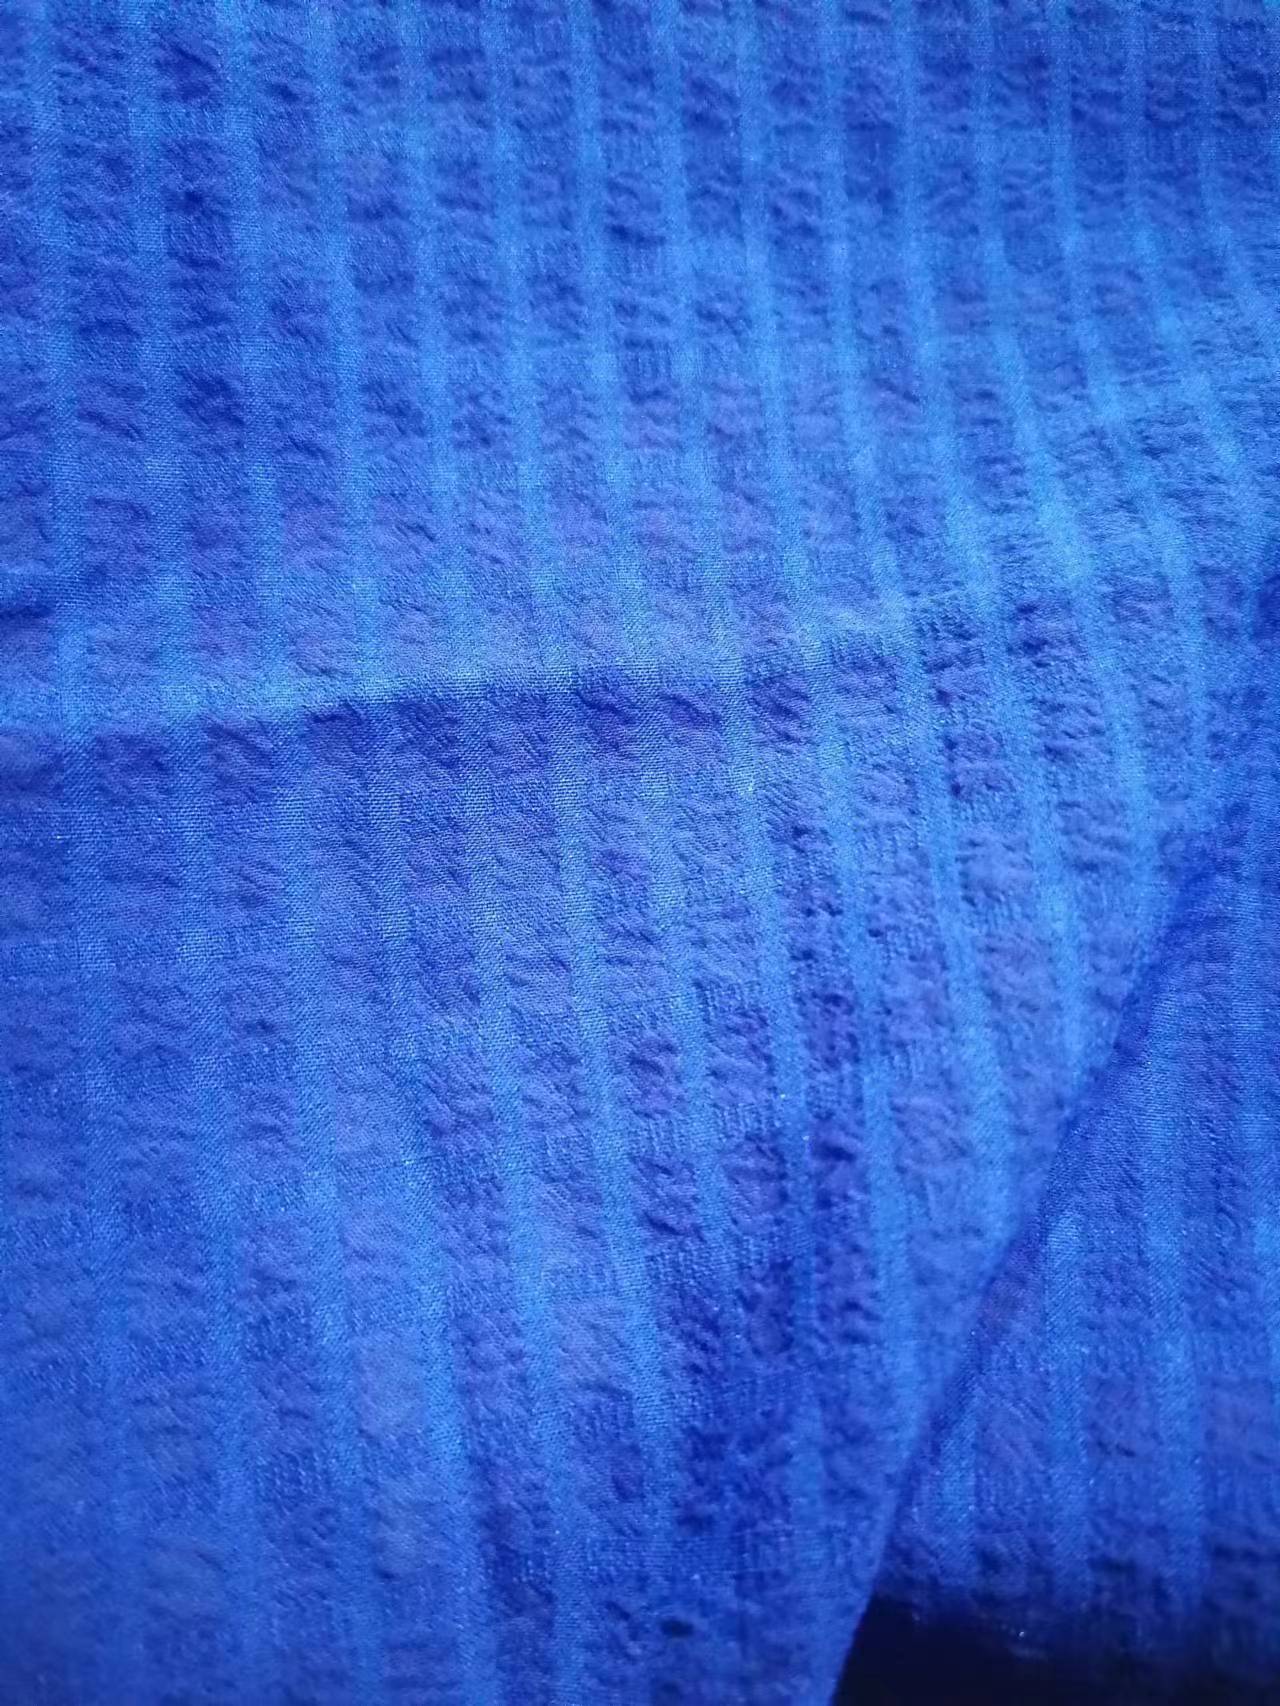 100% Polyester crepe check fabric